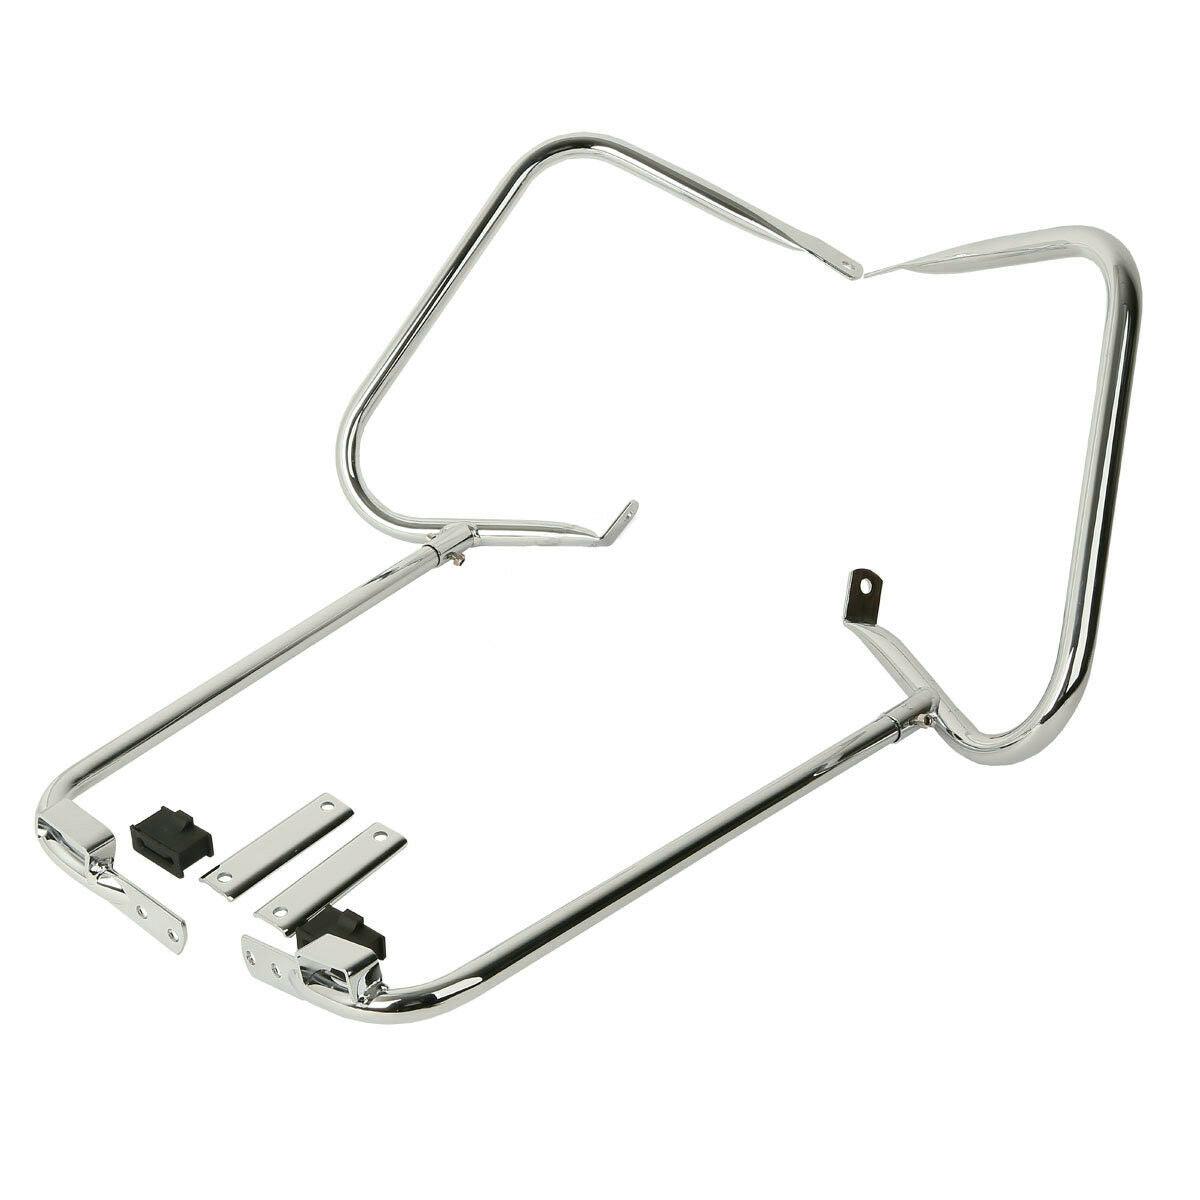 Chrome Saddlebags Guard Bracket Fit For Harley Touring Road Electra Glide 97-08 - Moto Life Products